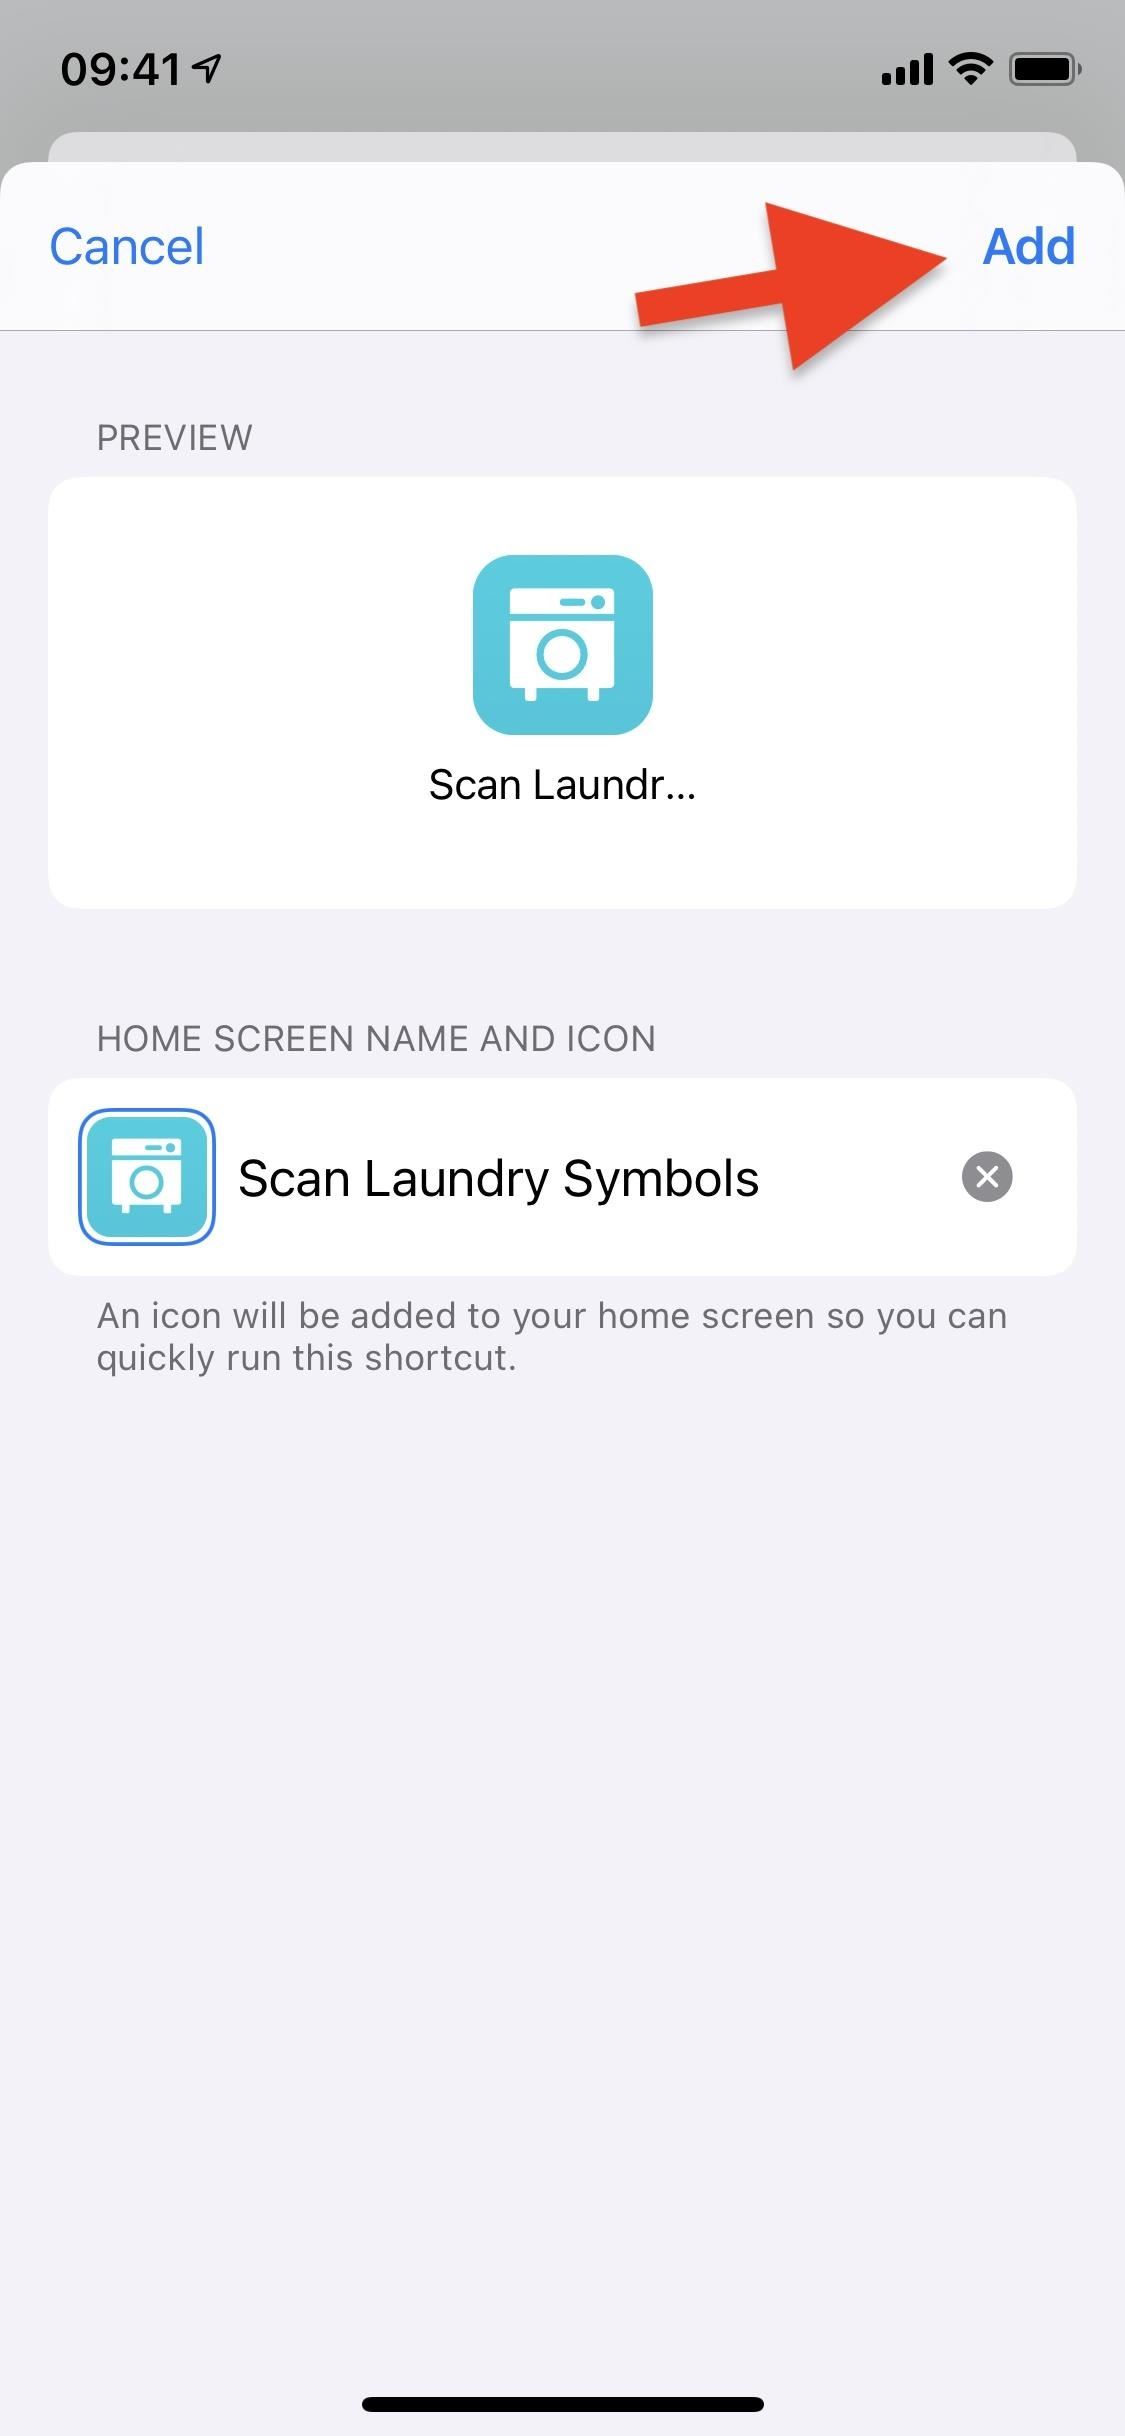 Scan Laundry Care Symbols with Your iPhone to See How You're Actually Supposed to Wash Clothes